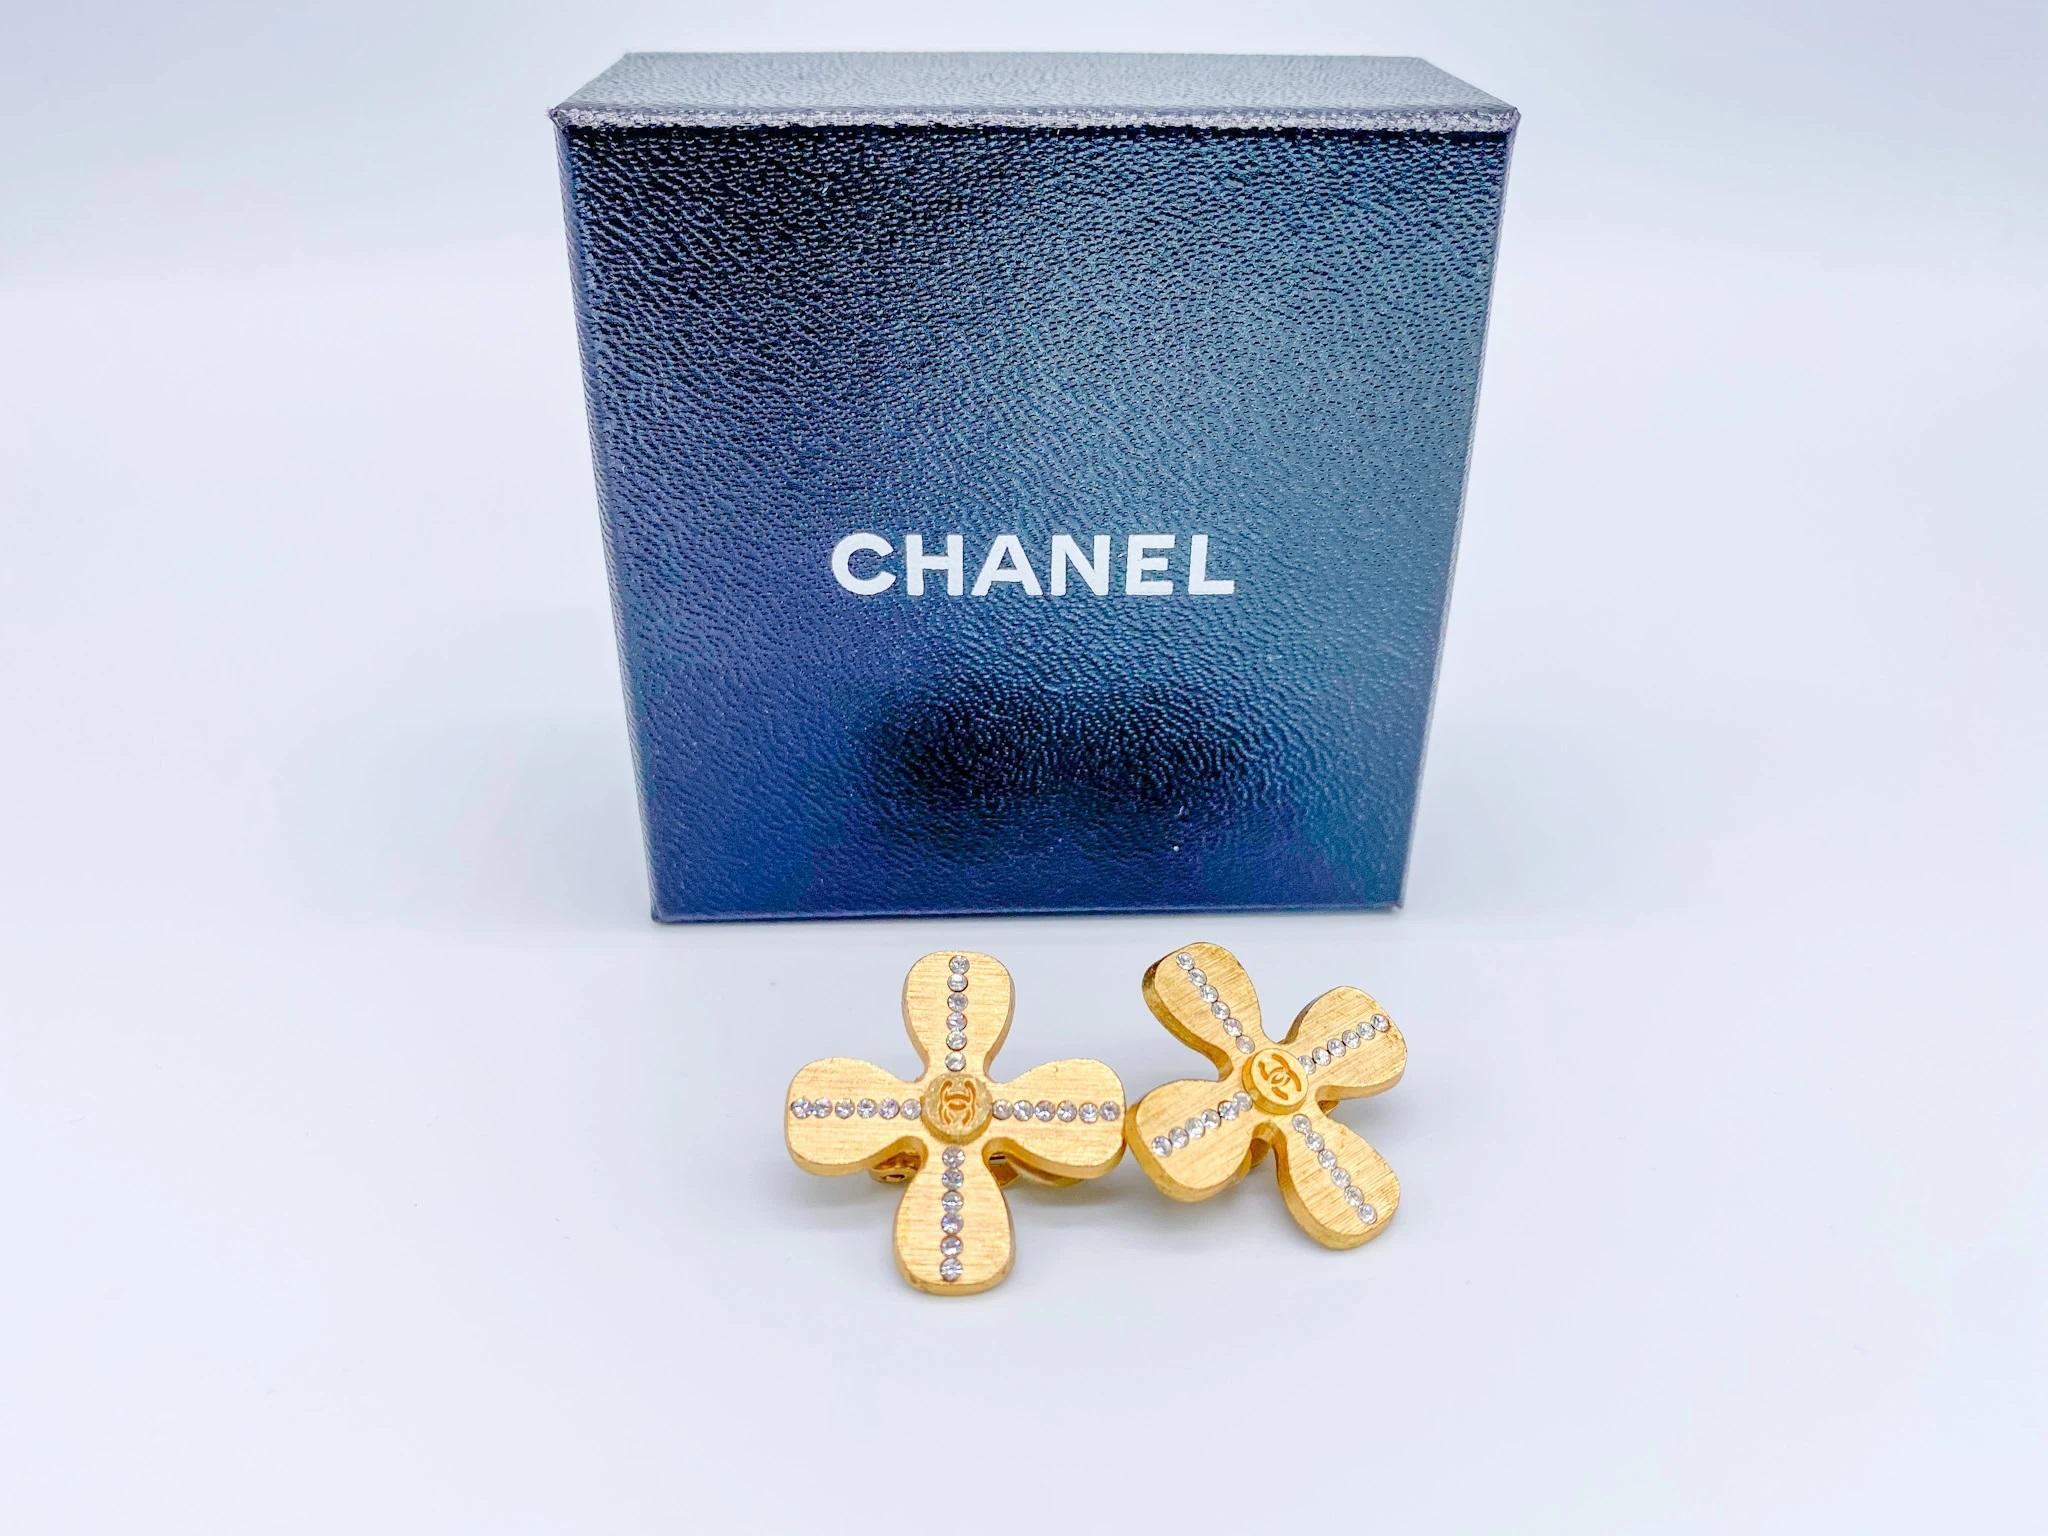 CHANEL Earrings Vintage Clip On 2001 Cruise Collection 6